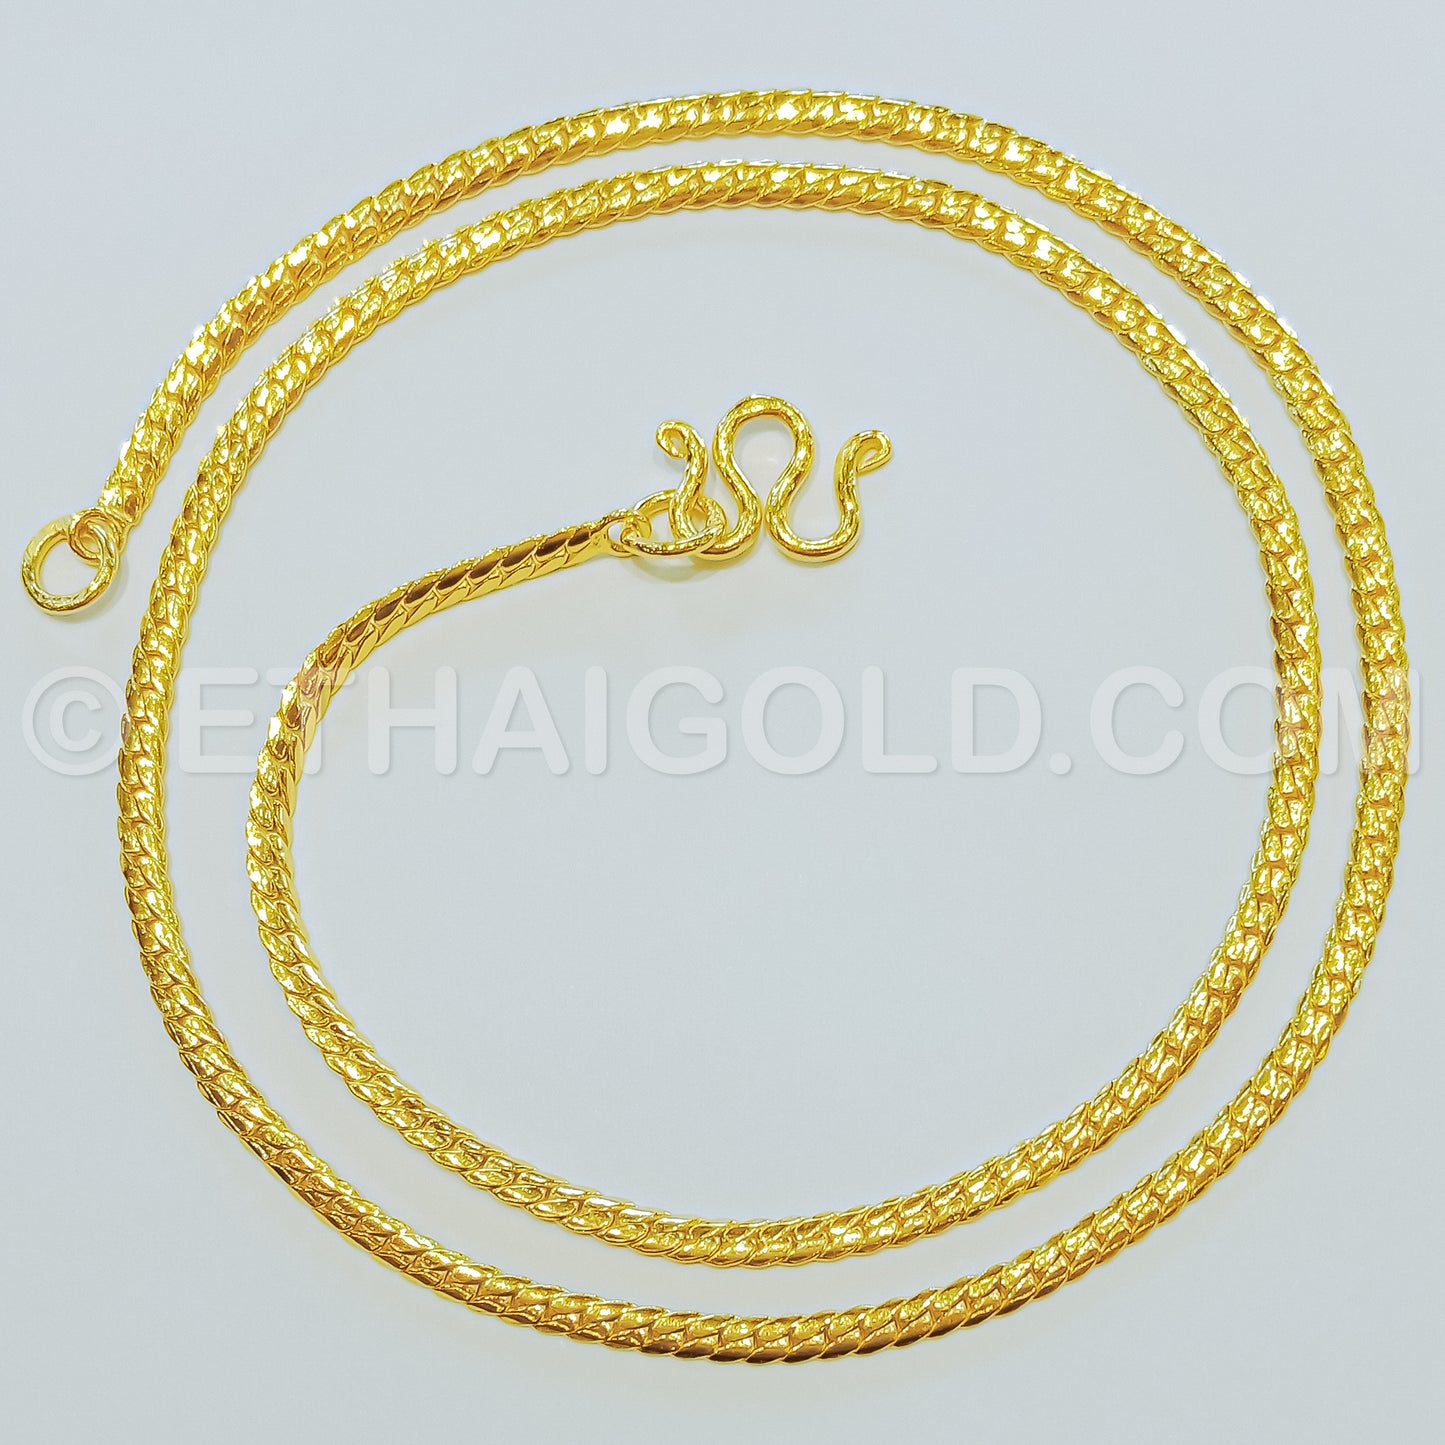 4 BAHT POLISHED SOLID DOMED CURB CHAIN NECKLACE IN 23K GOLD (ID: N0604B)